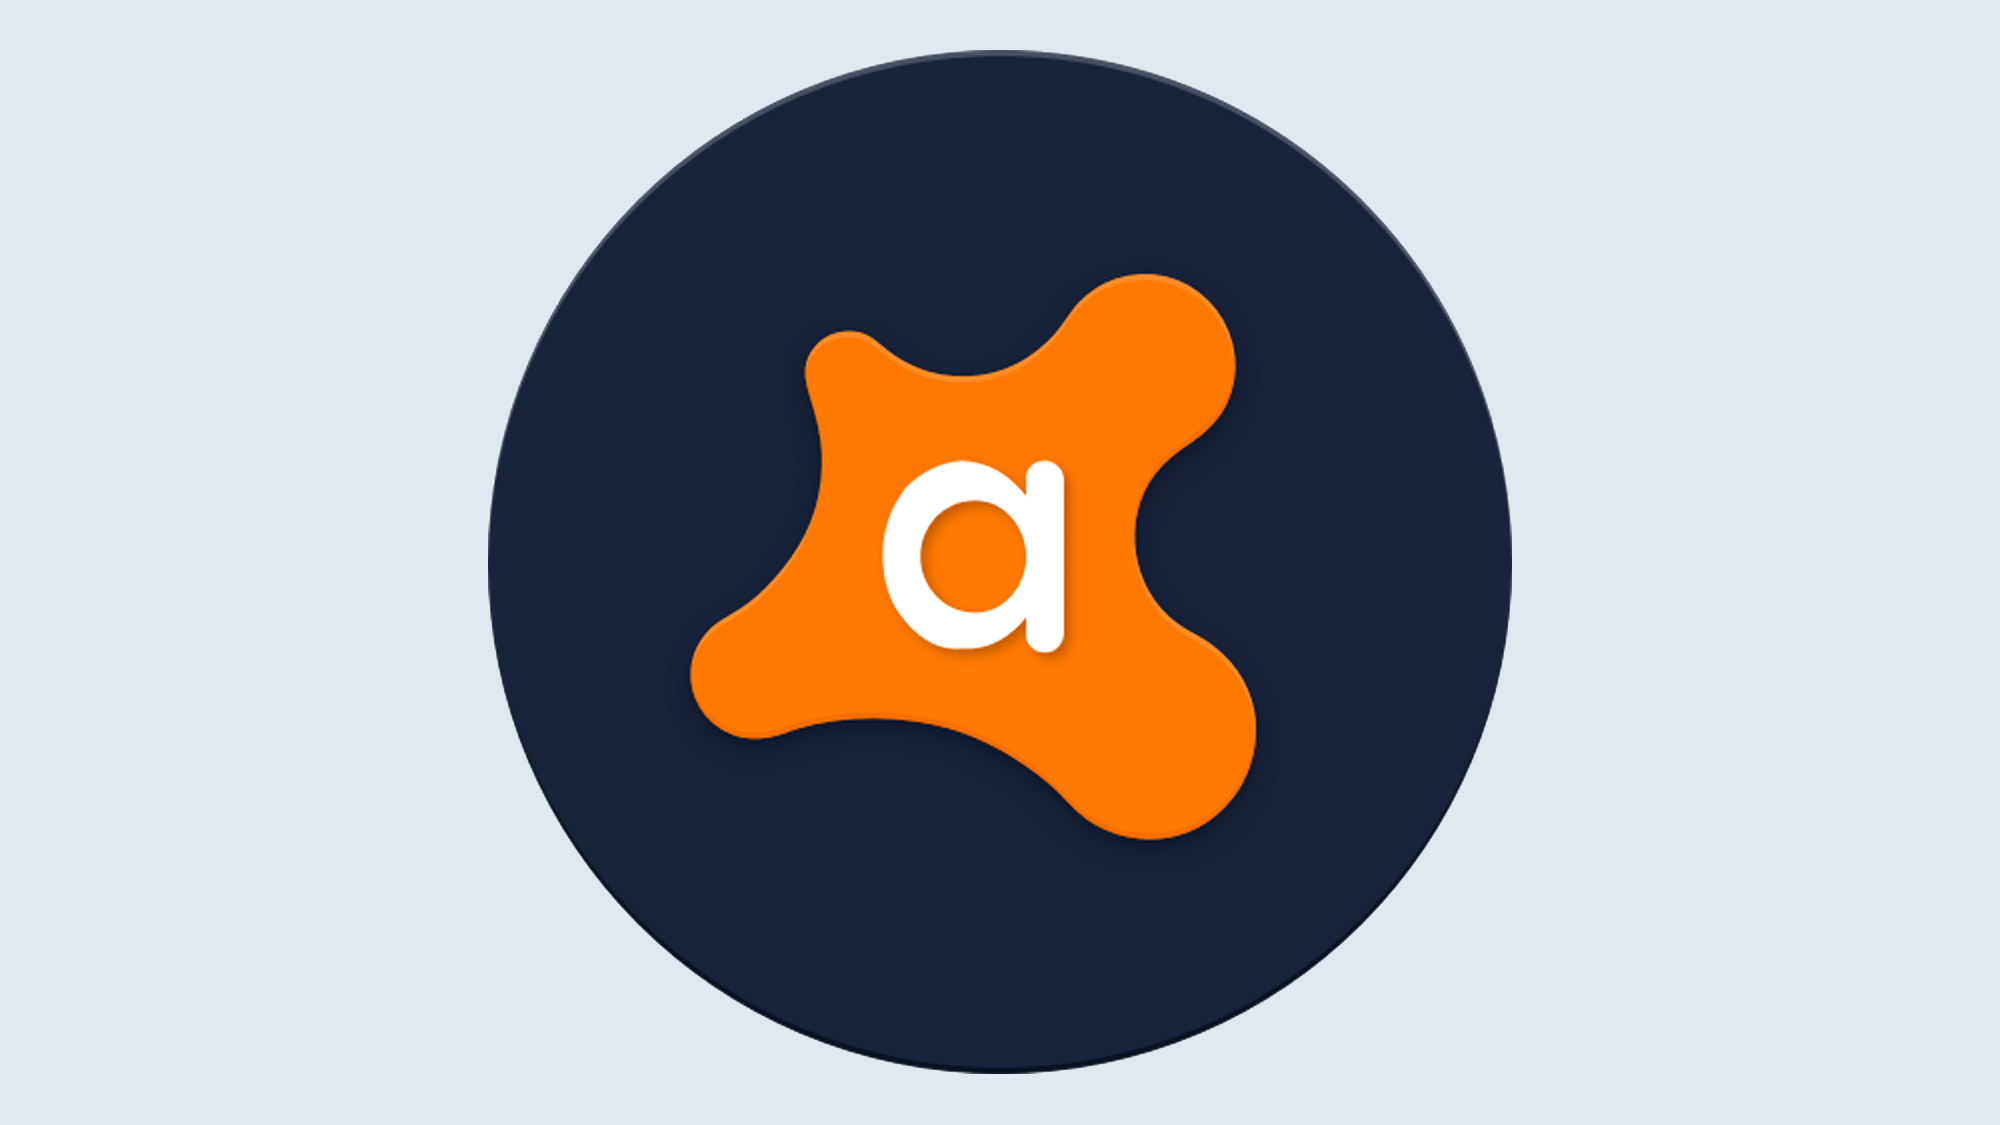 The new Avast logo on a neutral background.